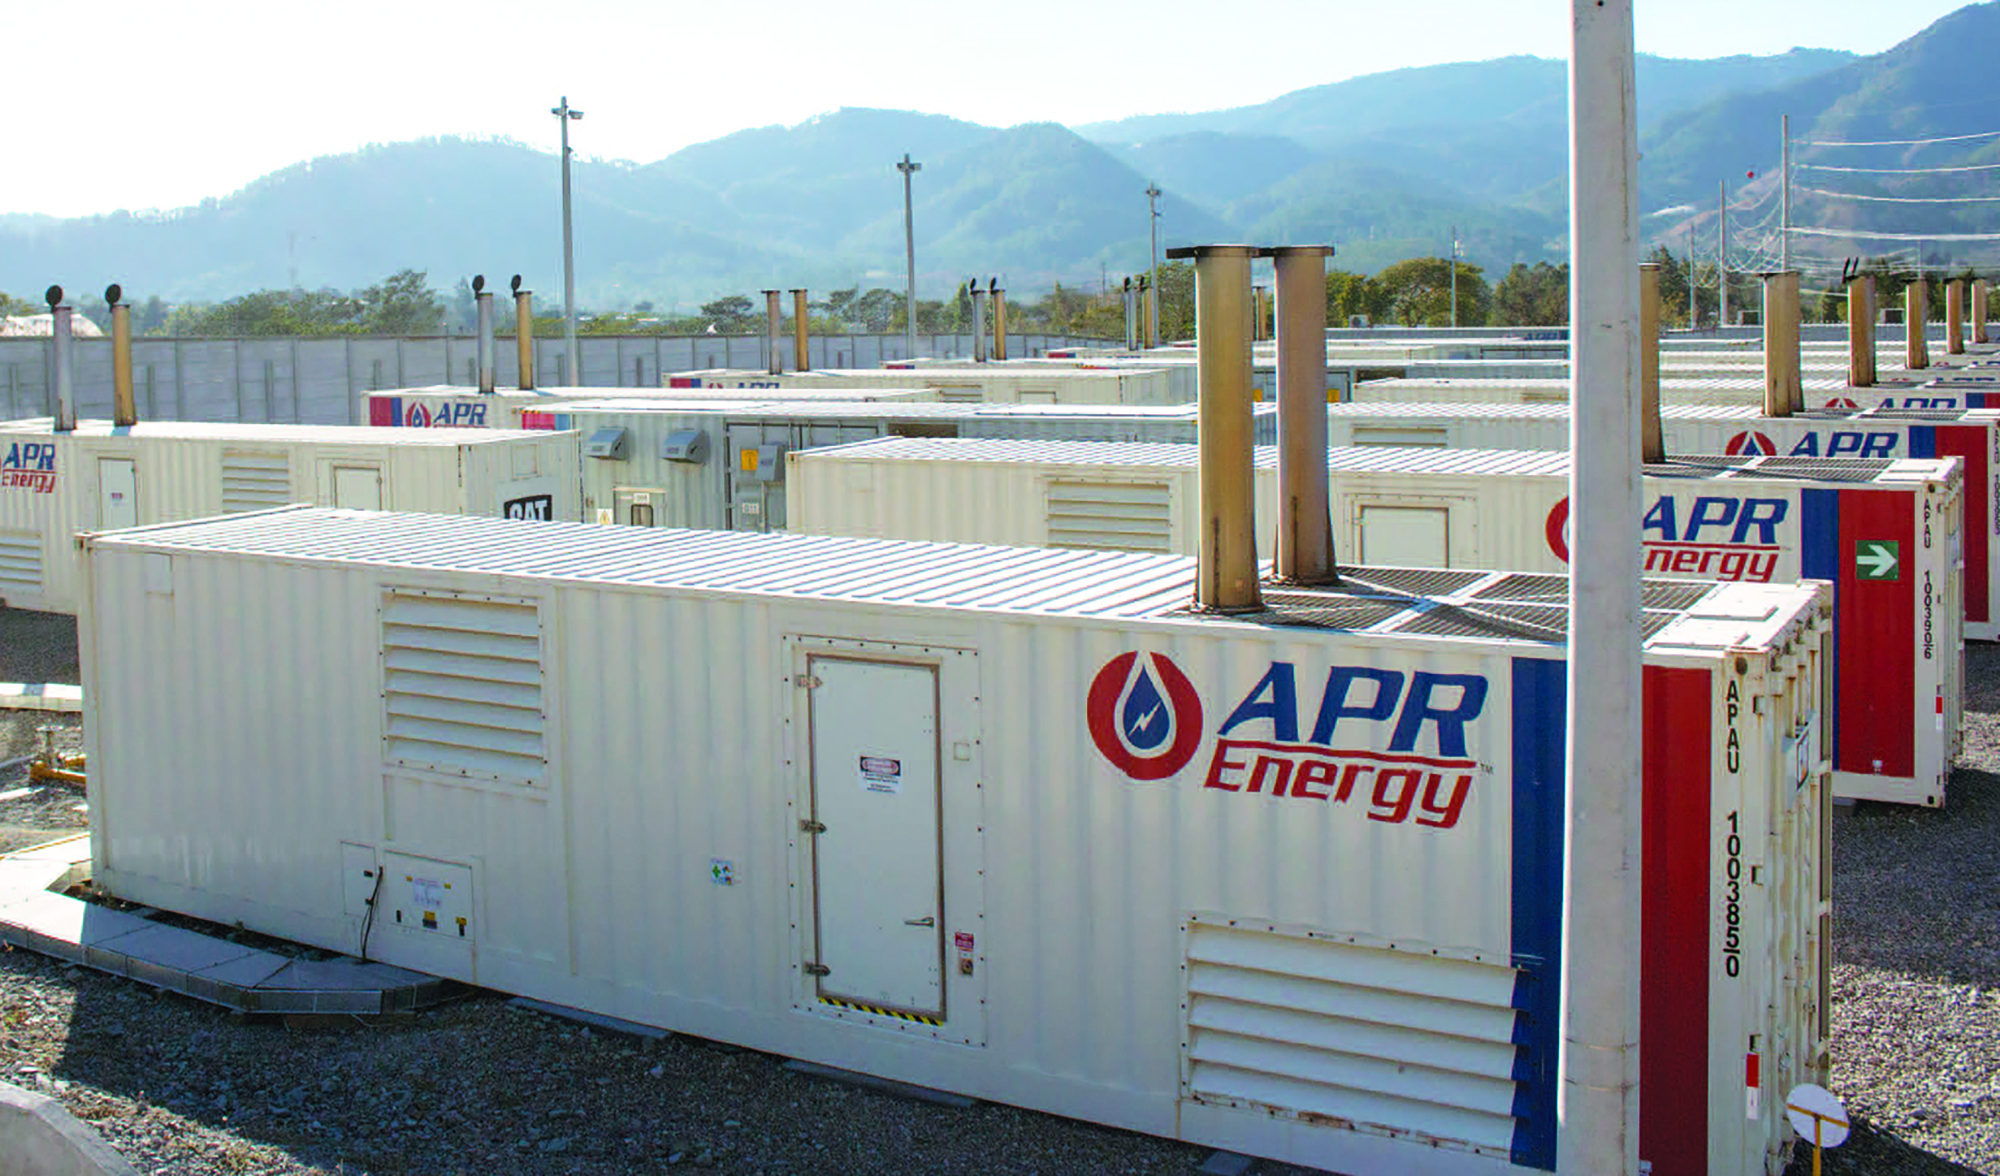 APR Energy provides mobile, temporary power plants that can be quickly delivered all over the world.